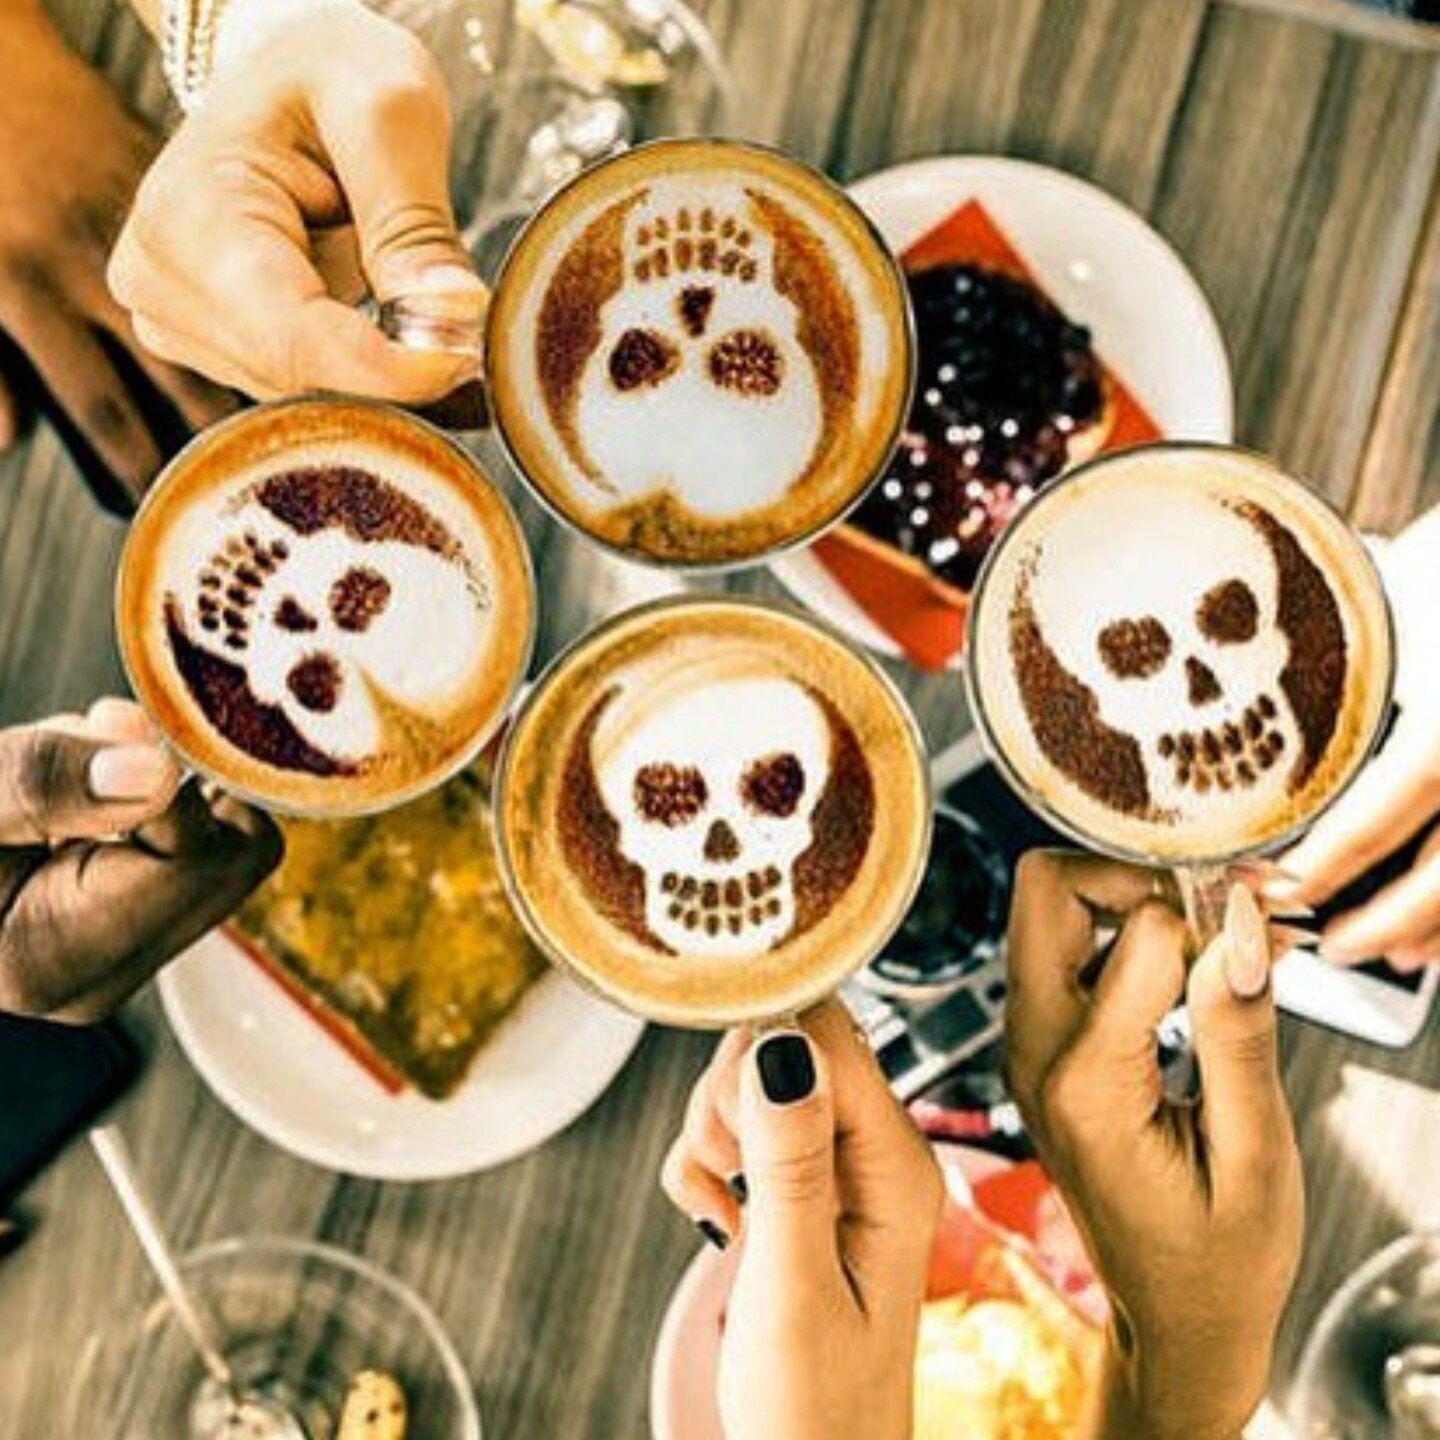 Hello lovely mortals - please join me tonight for a virtual Death Cafe❤️
https://www.gracefulfusion.com/death-cafe